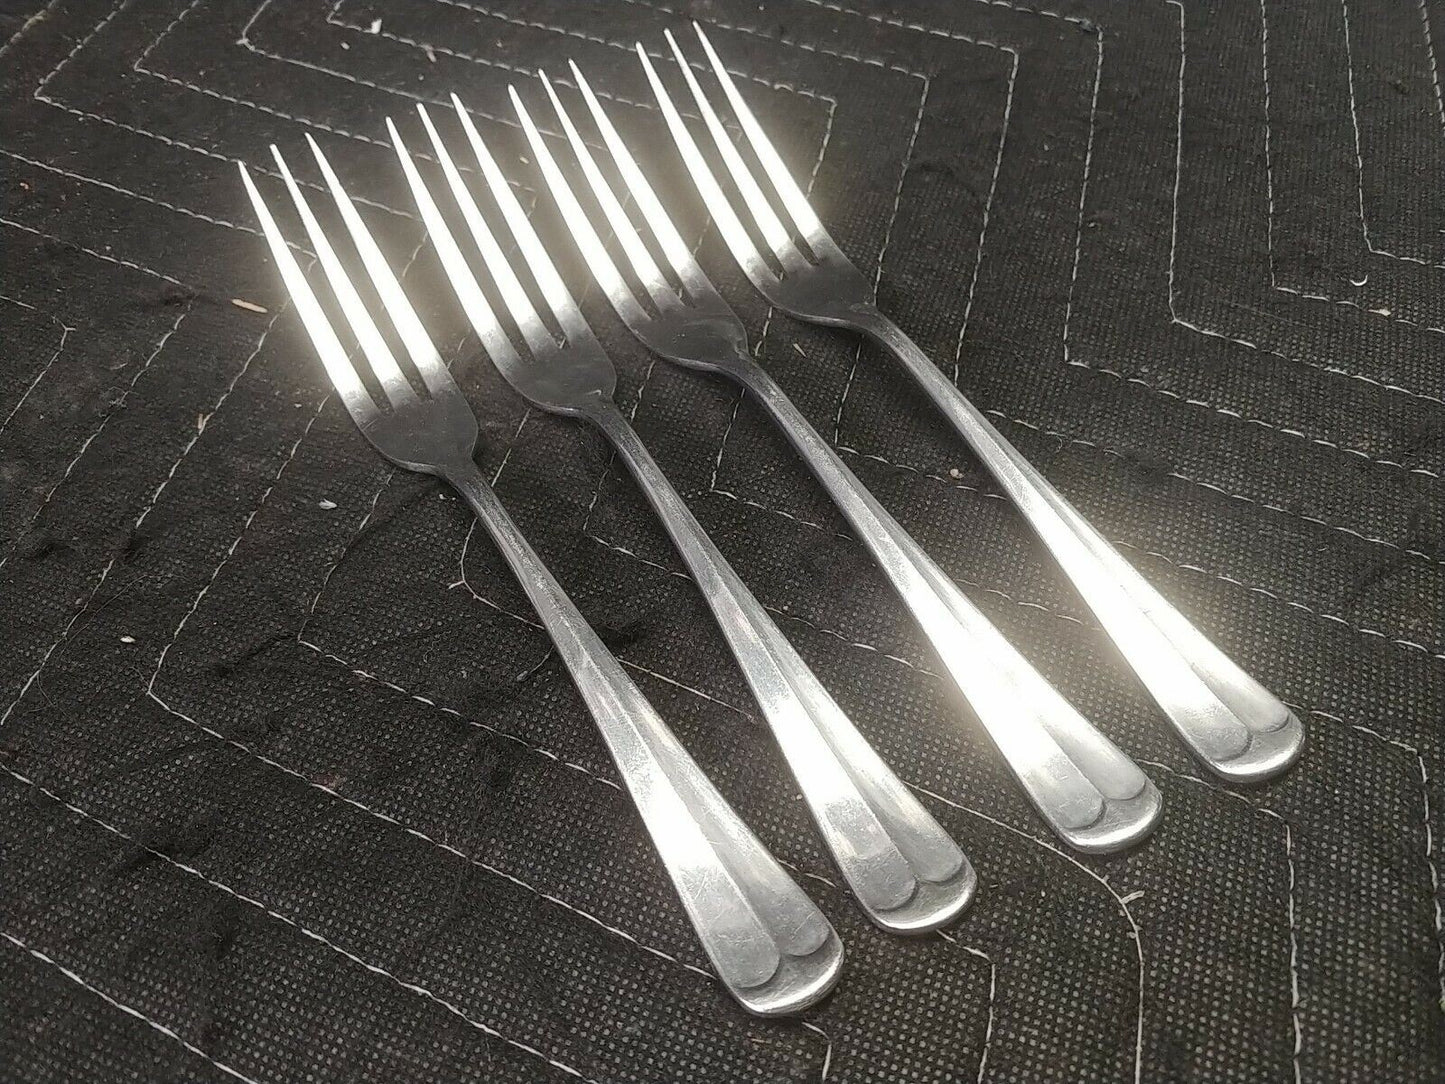 17 PIECES Supreme Cutlery / TOWLE 18/8 Stainless Flatware  SUPREME CUTLERY